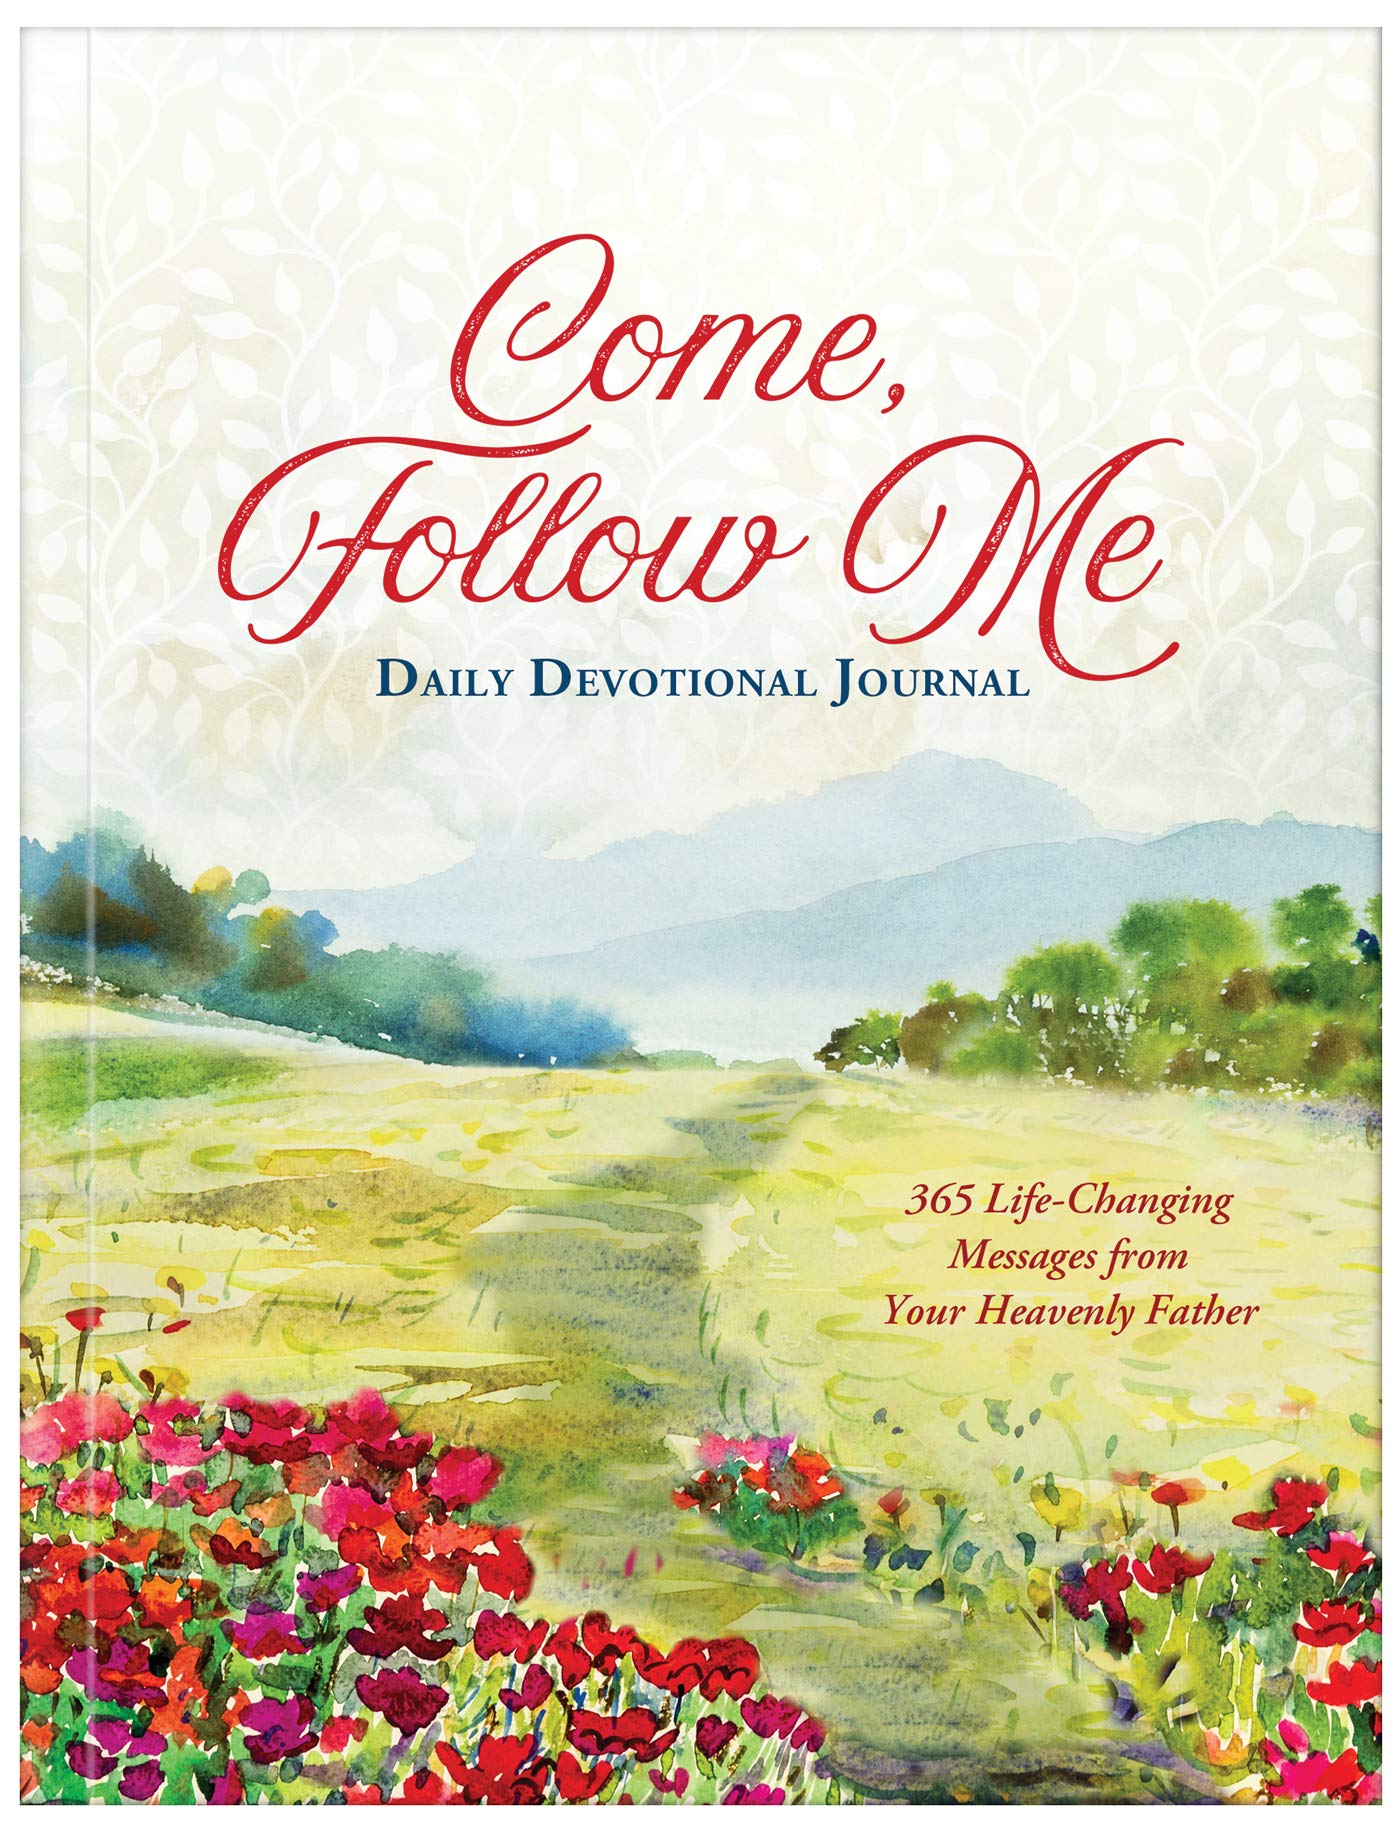 ROCKONLINE | Come, Follow Me Daily Devotional Journal: 365 Life-Changing Messages from Your Heavenly Father | Hardcover | Dayspring | Christian Living | Women | Christian Women | Devotional | Quiet Time | New Creation Church | NCC | Joseph Prince | ROCK Bookshop | ROCK Bookstore | Star Vista | Free delivery for Singapore Orders above $50.